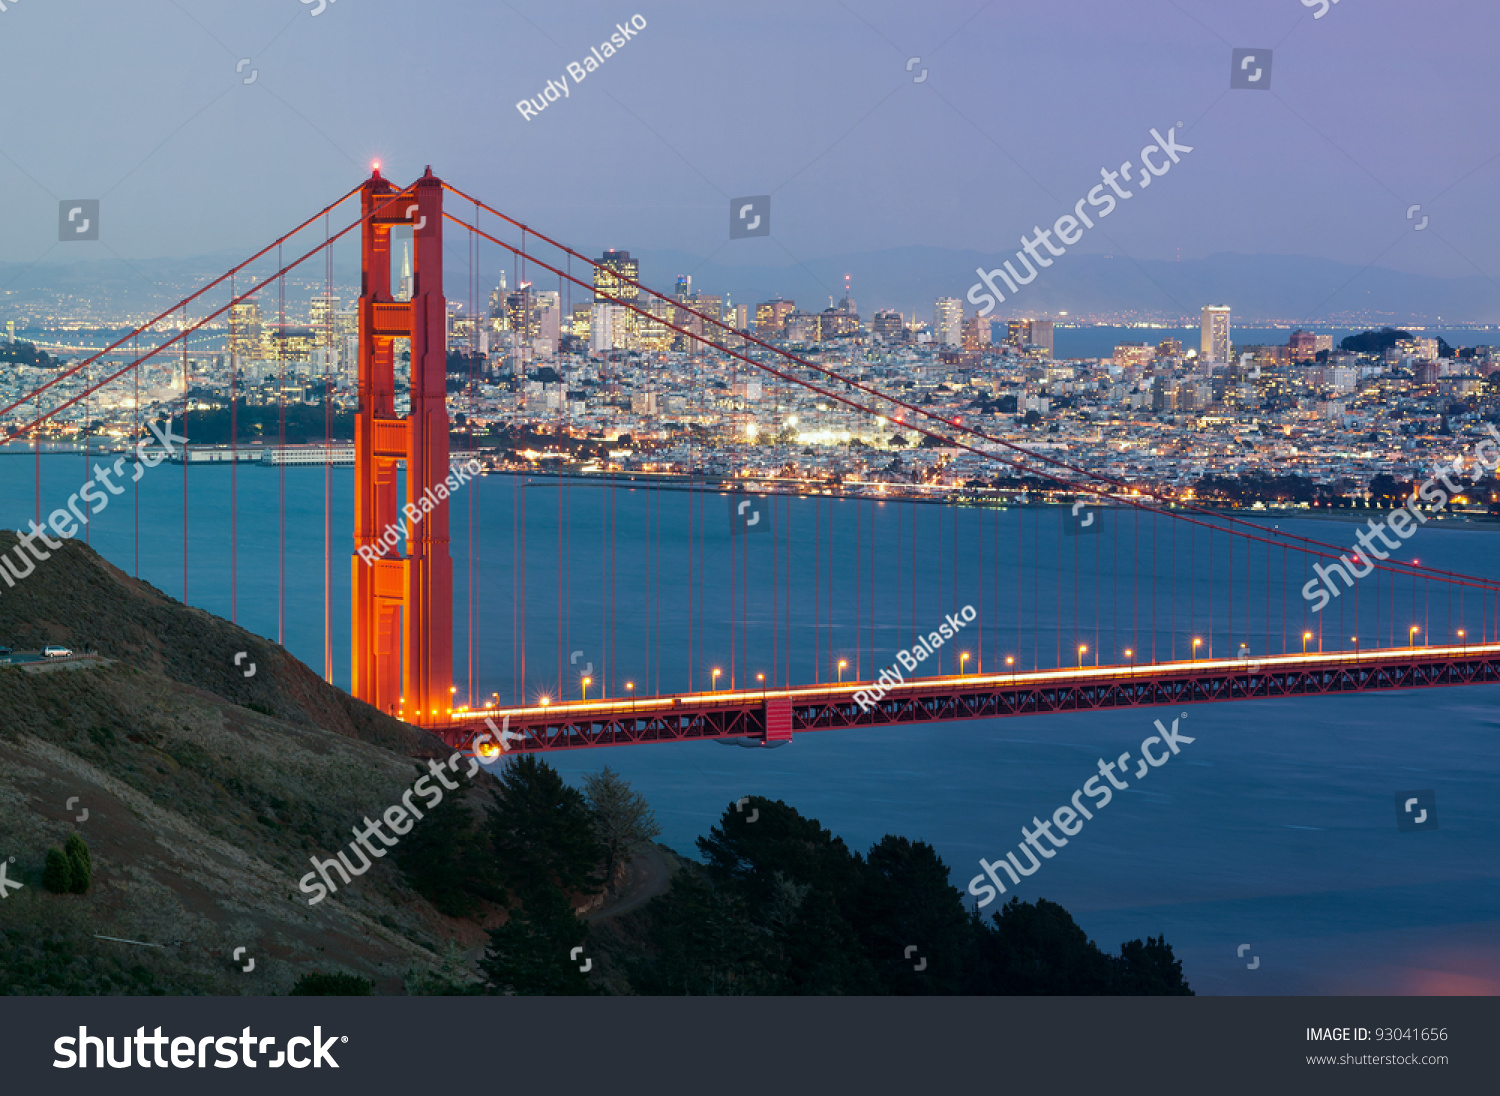 San Francisco. Image of Golden Gate Bridge with San Francisco skyline in the background. #93041656